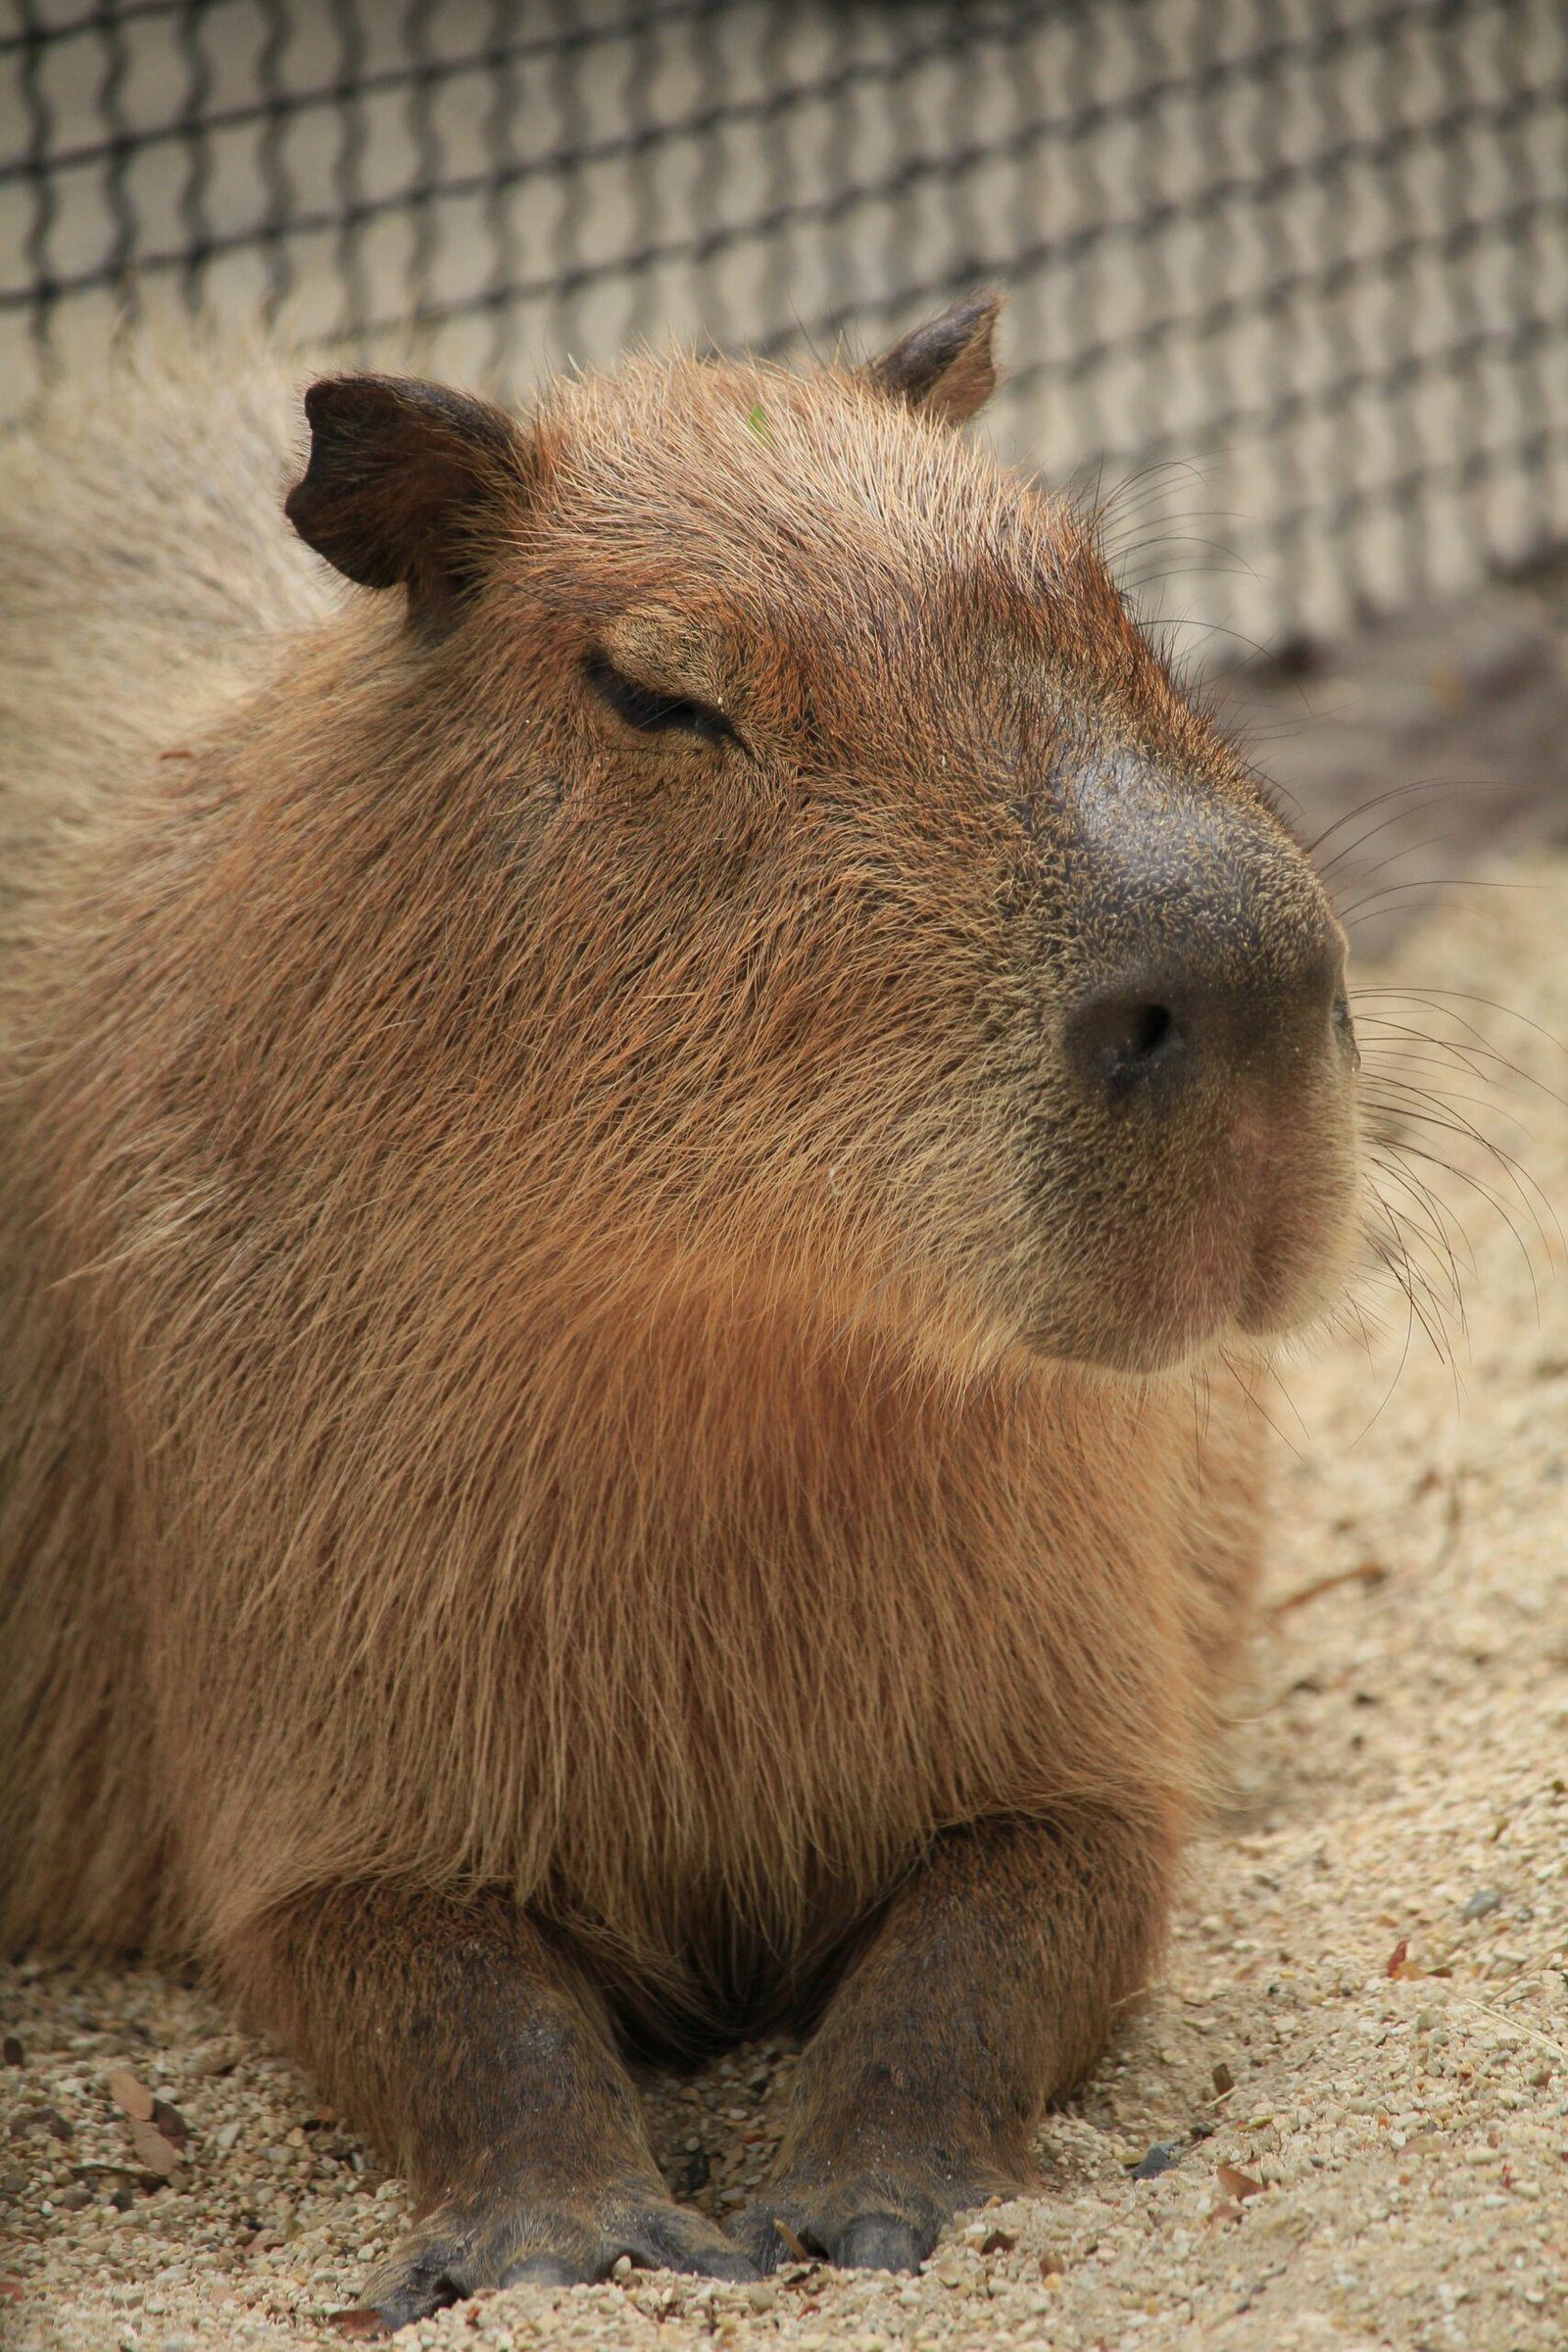 How to Care for a Capybara as a Pet